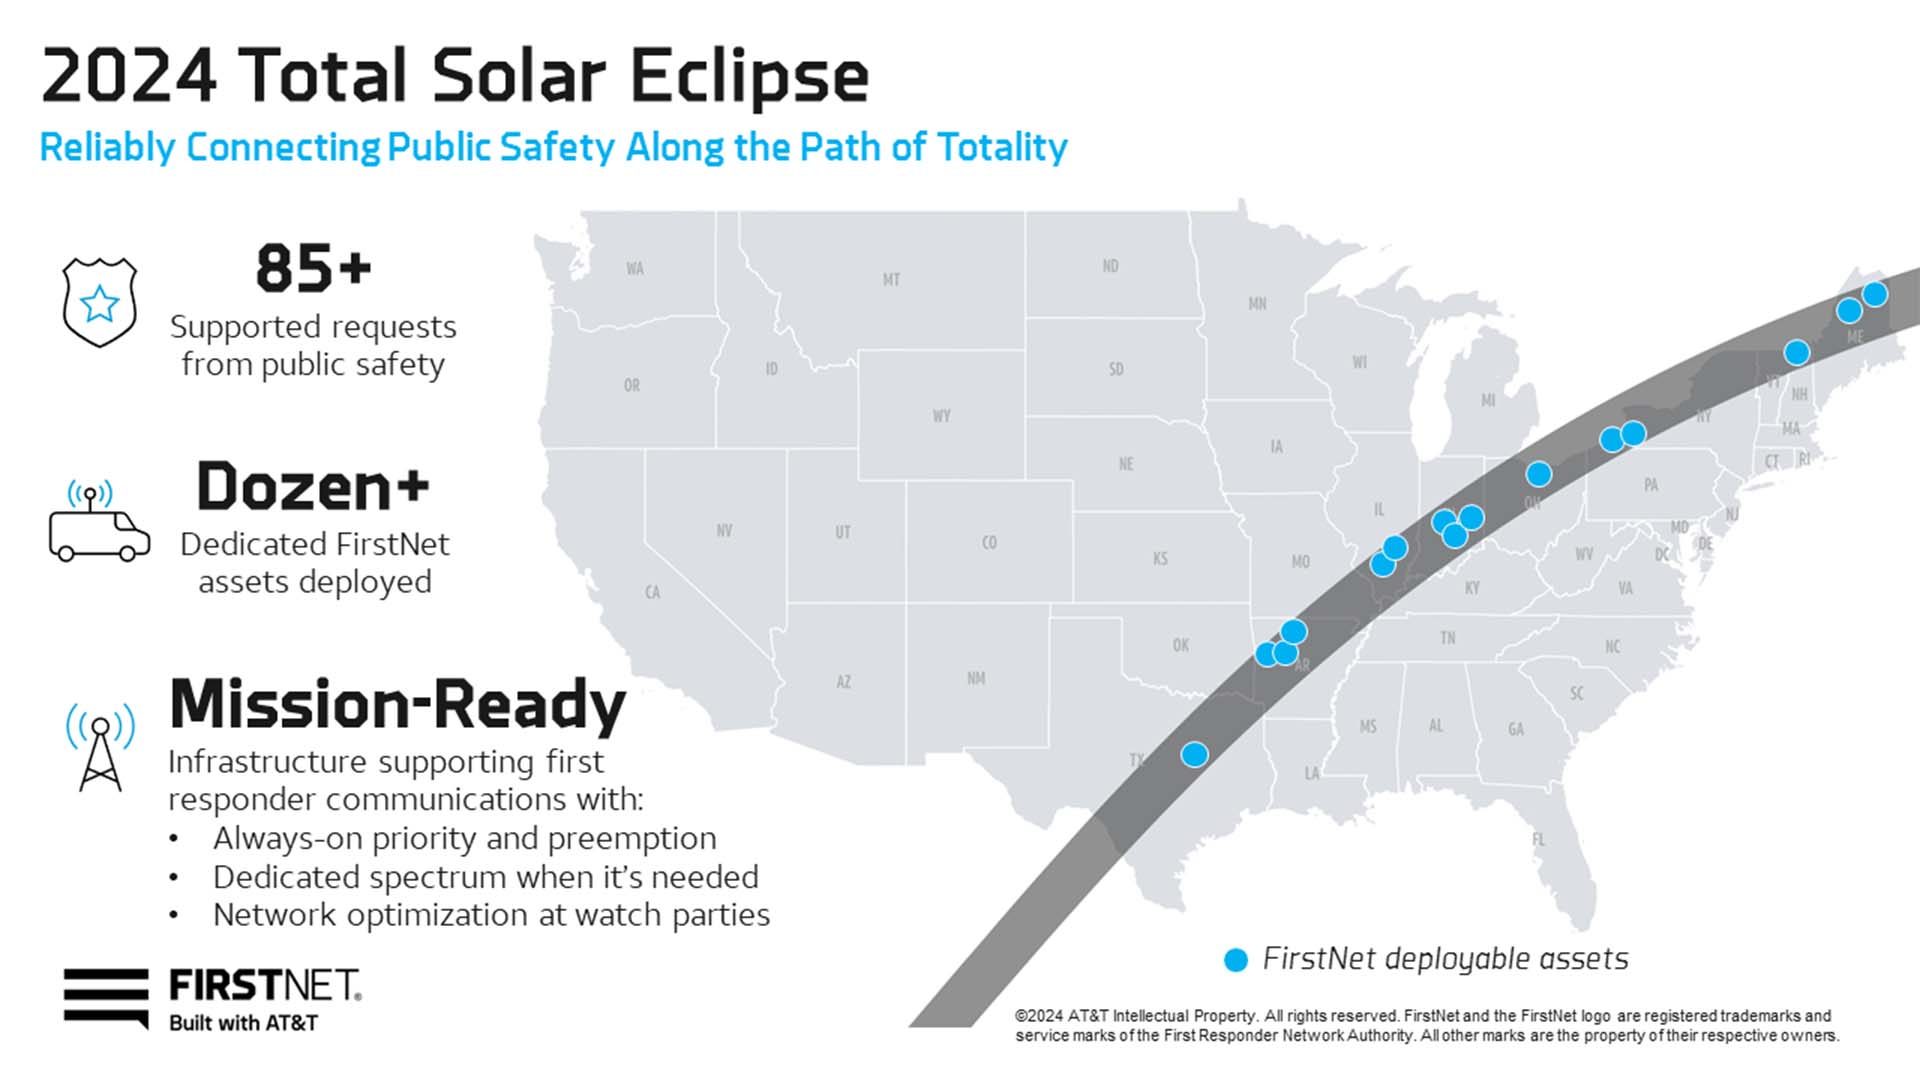 FirstNet, Built with AT&T | 2024 Solar Eclipse | Reliably Connecting Public Safety Along the Path of Totality infographic